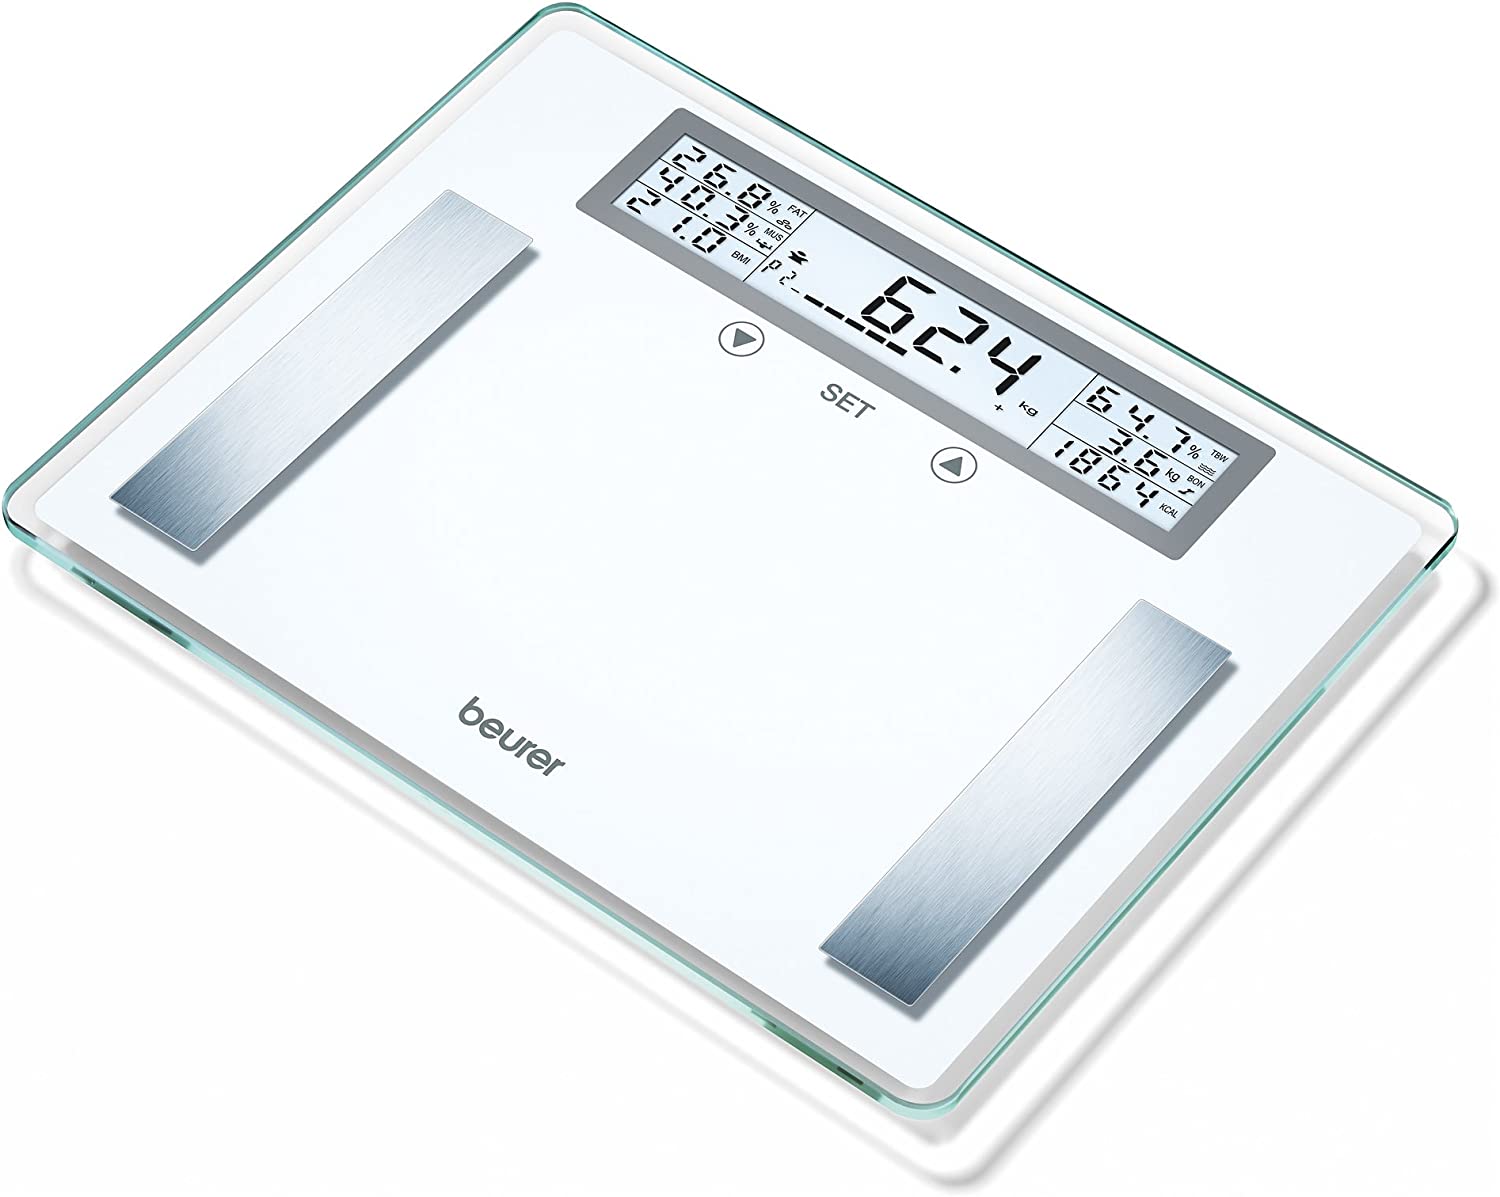 Beurer BG 51 Diagnostic Scales (XXL Glass Scales up to 200 kg Load Capacity, 100 g Division, Display of Body Weight, Fat, Water Muscle Percentage, Bone Mass, BMI, Calorie Dequirements)